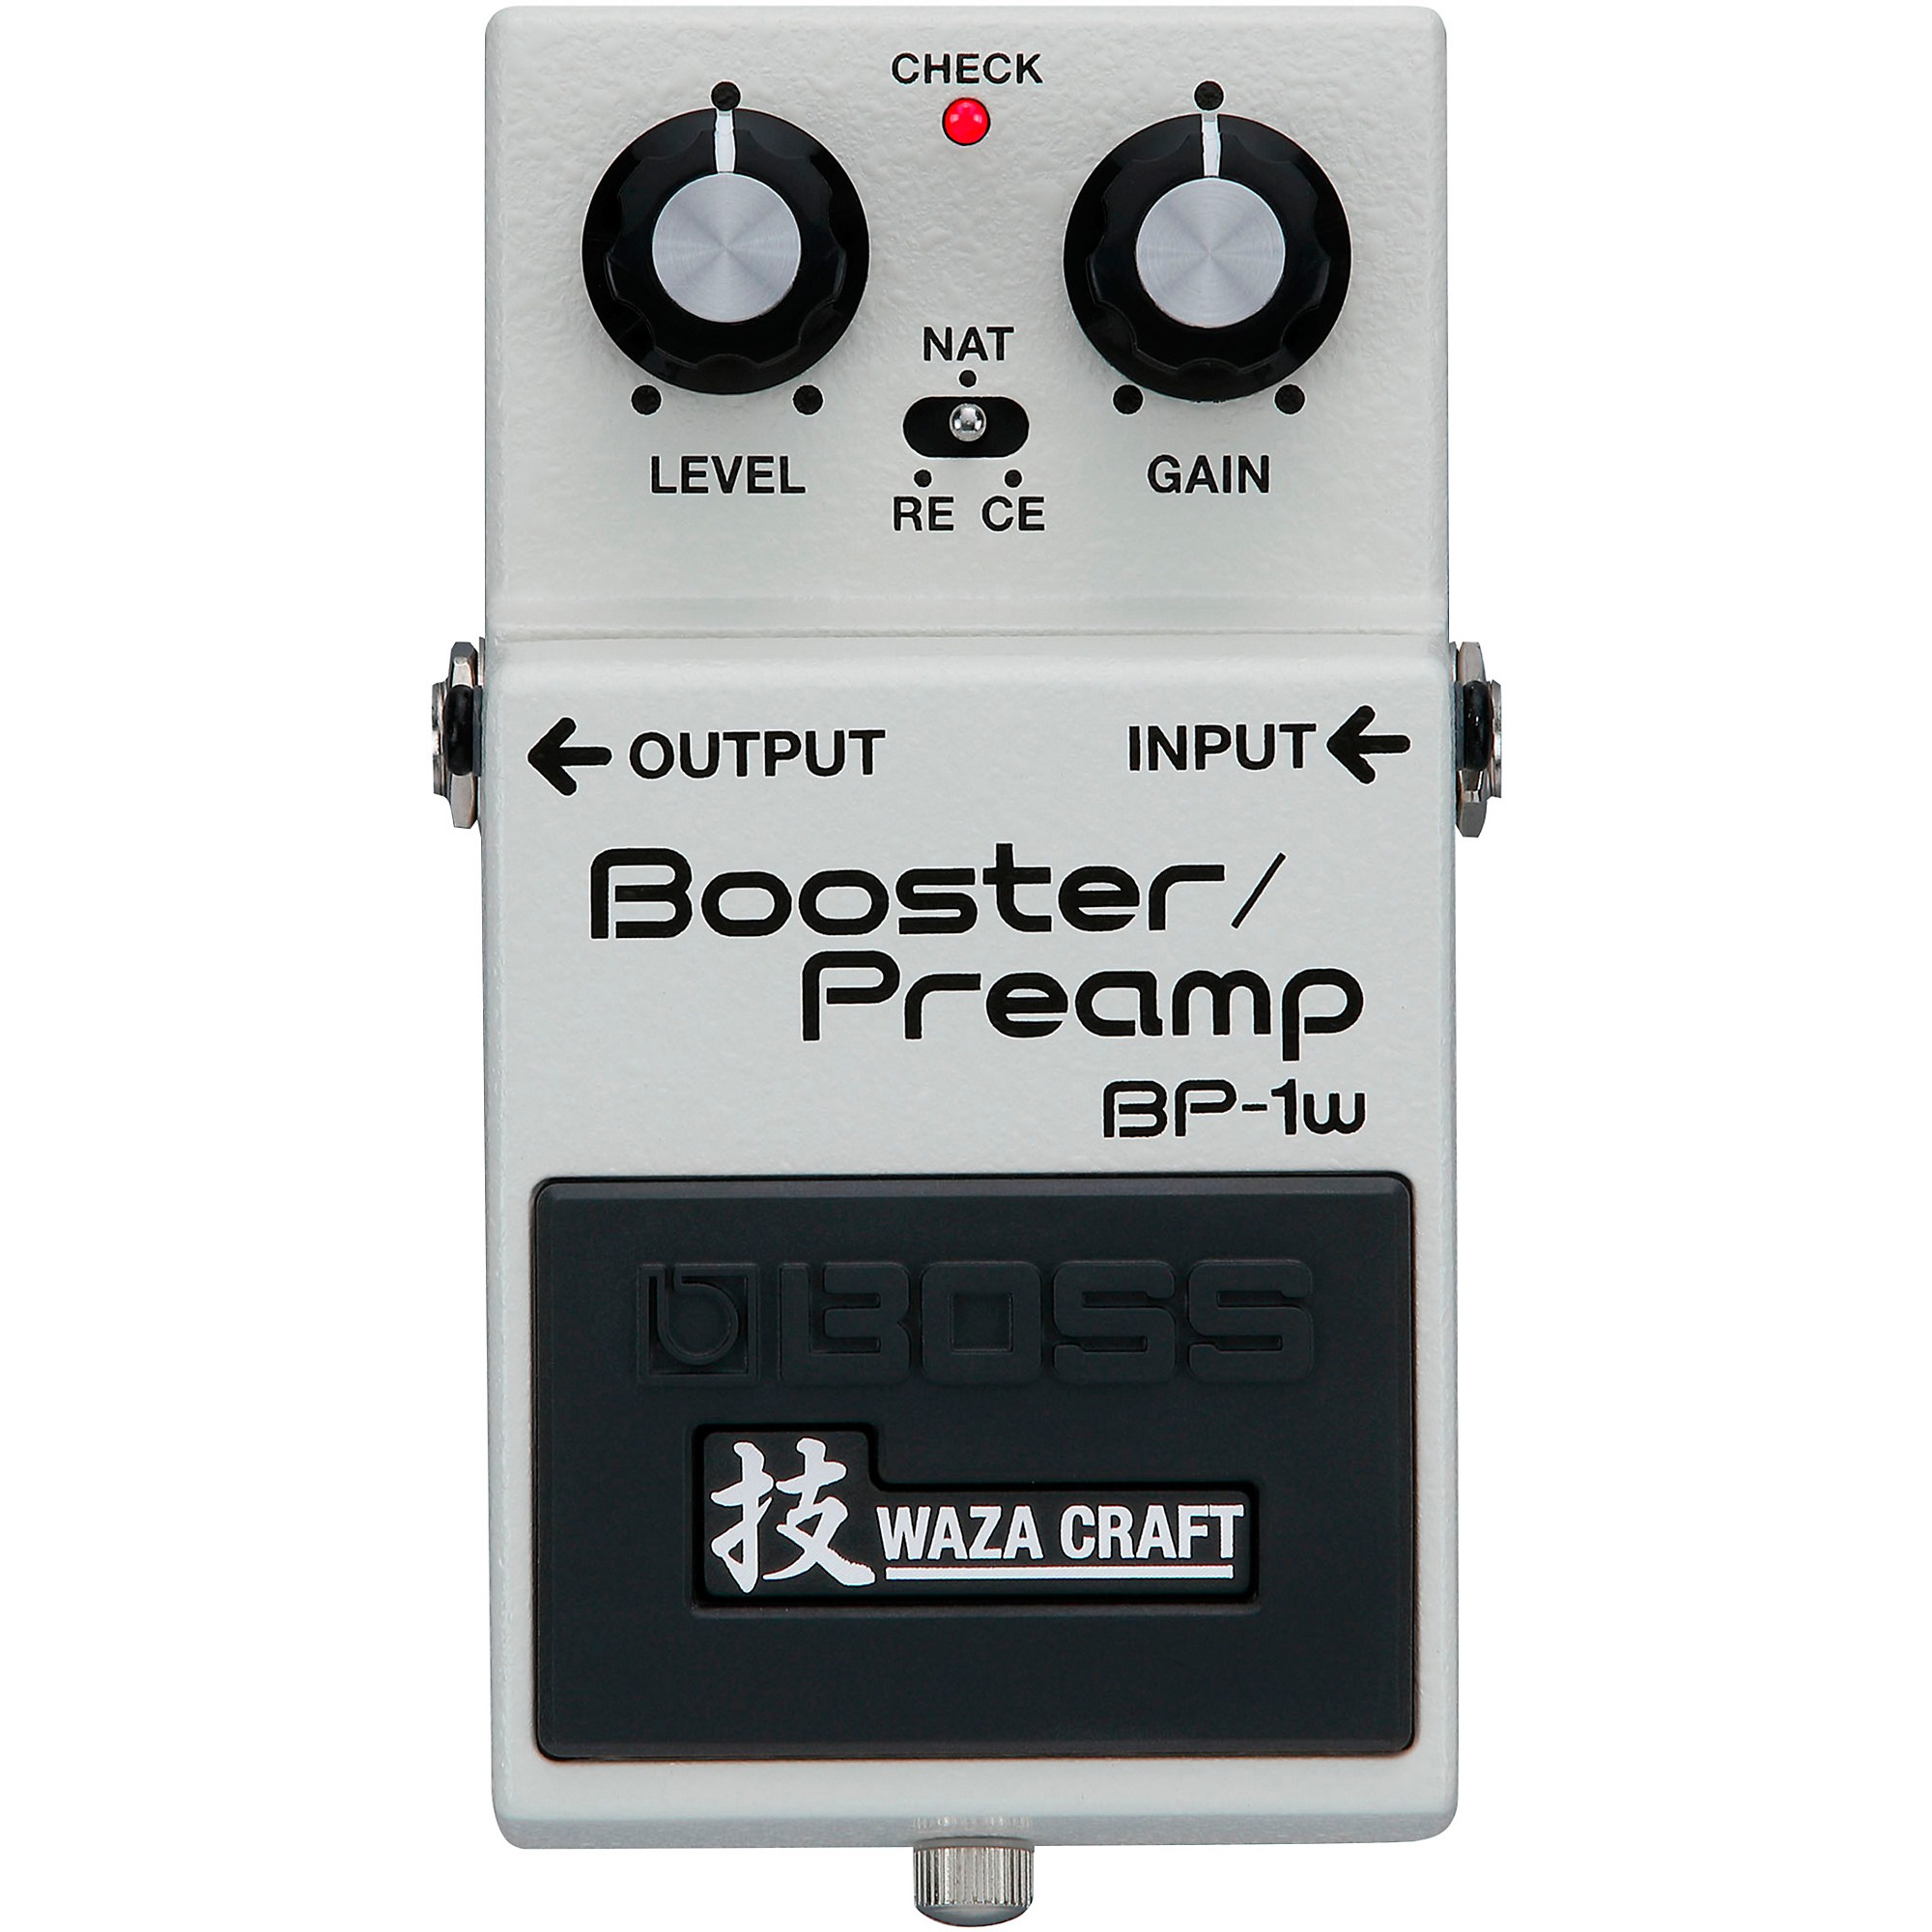 BOSS BOSS BP-1W Waza Craft Booster/Preamp Effects Pedal